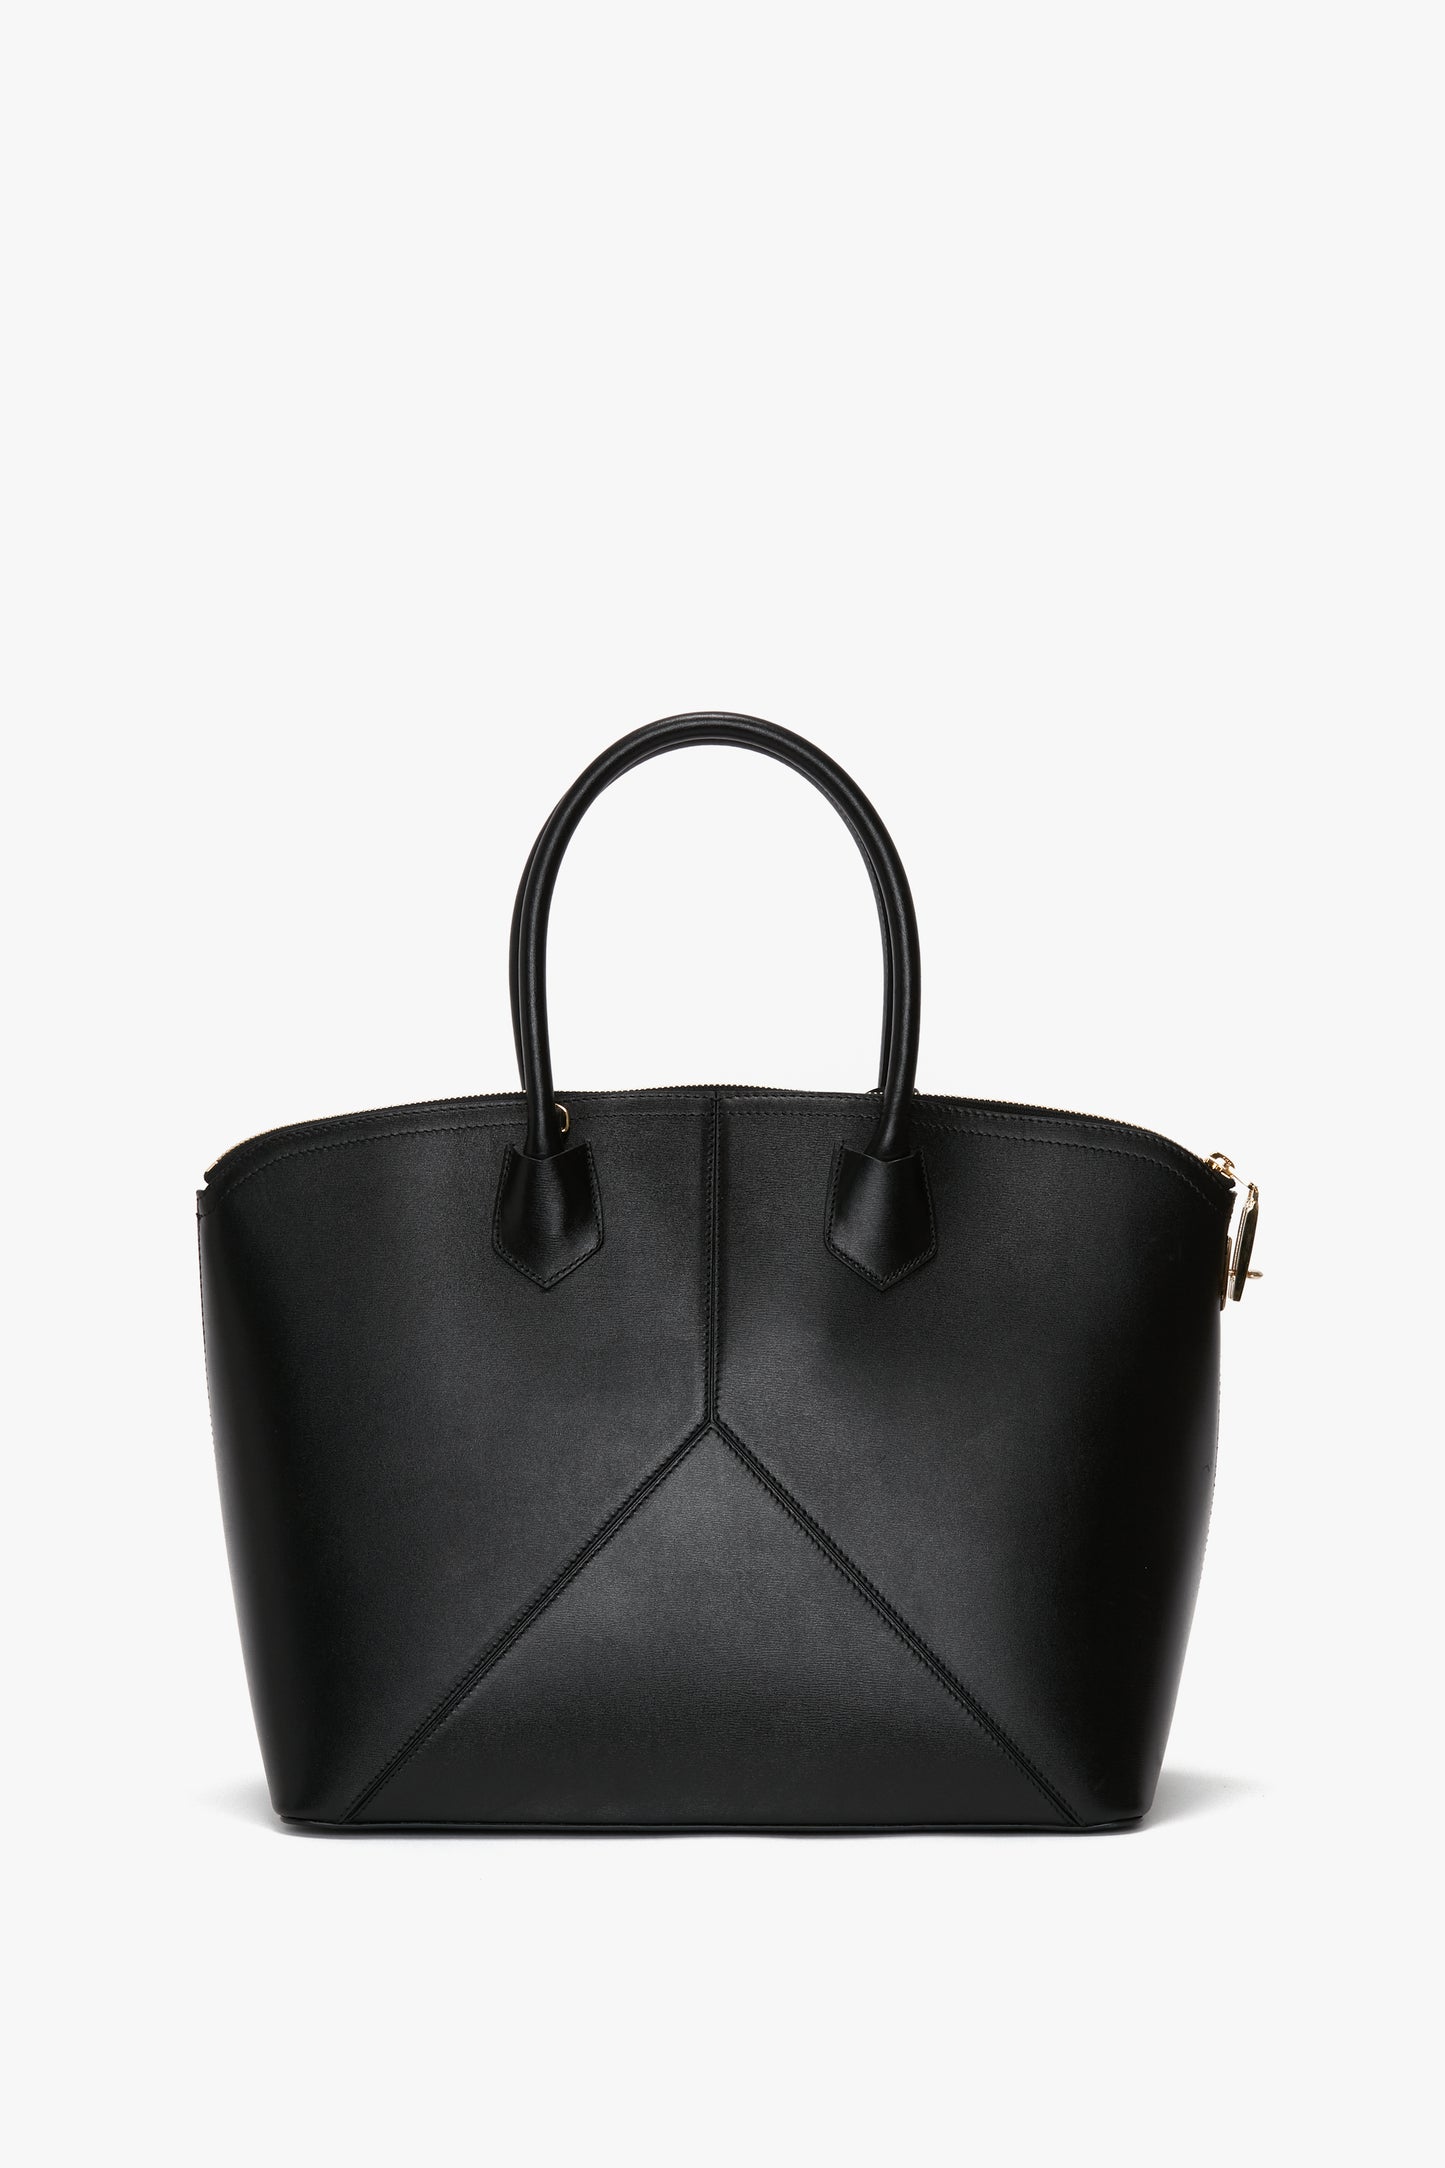 The Victoria Beckham Victoria Bag In Black Leather is a black leather handbag with two handles, featuring a structured design and elegant gold-tone hardware. This versatile hold-all includes refined leather panels, making it perfect for any occasion.